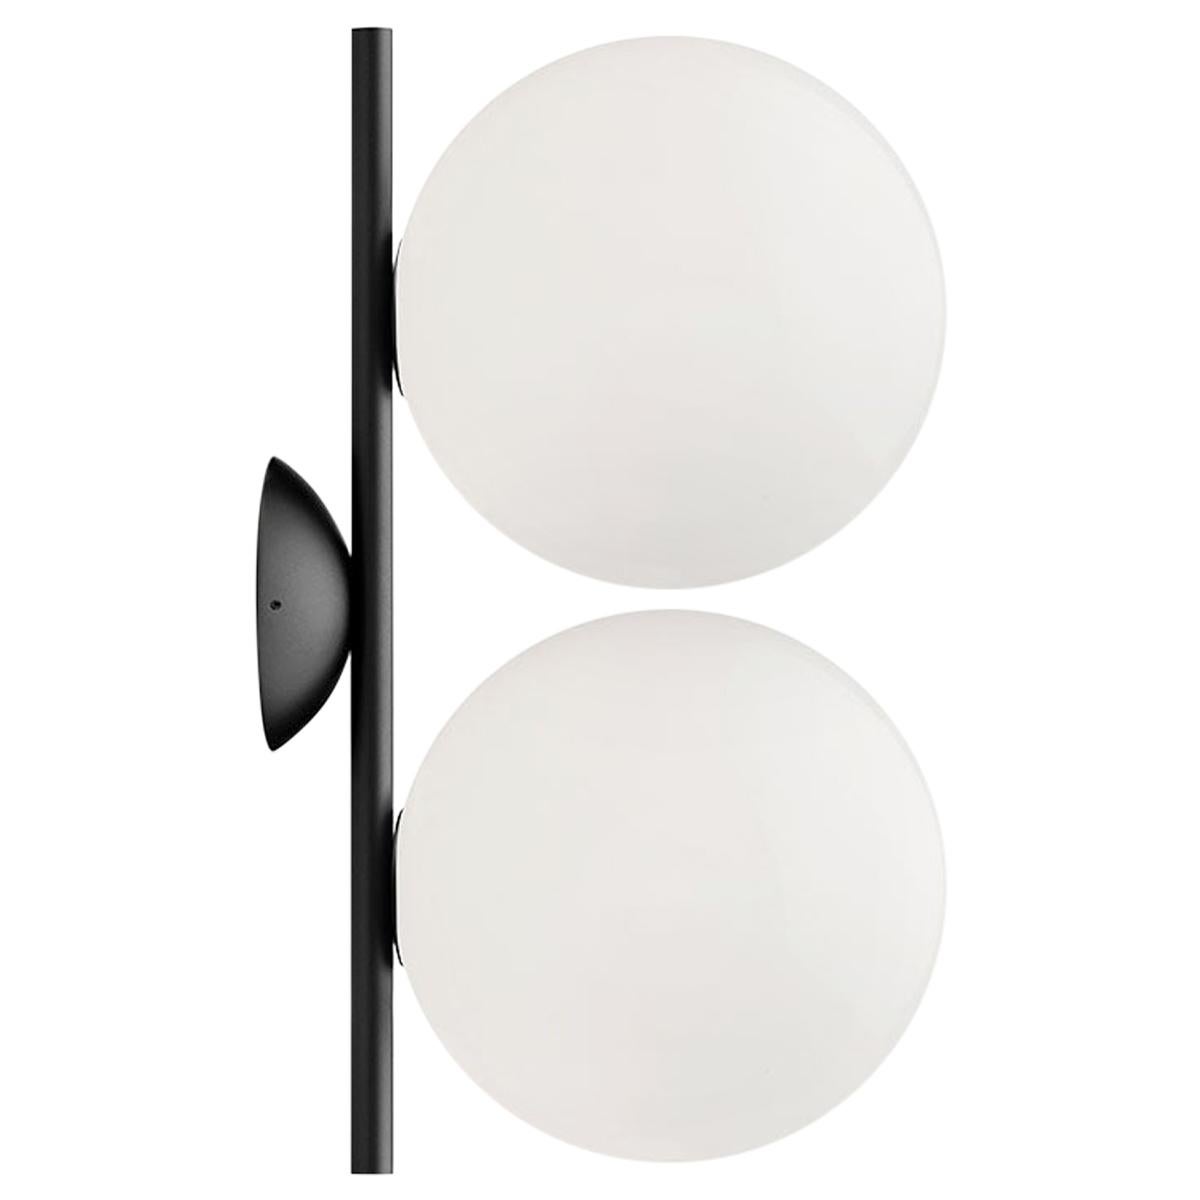 Flos IC Lights C/W1 Double Ceiling/Wall Sconce in Black by Michael Anastassiades